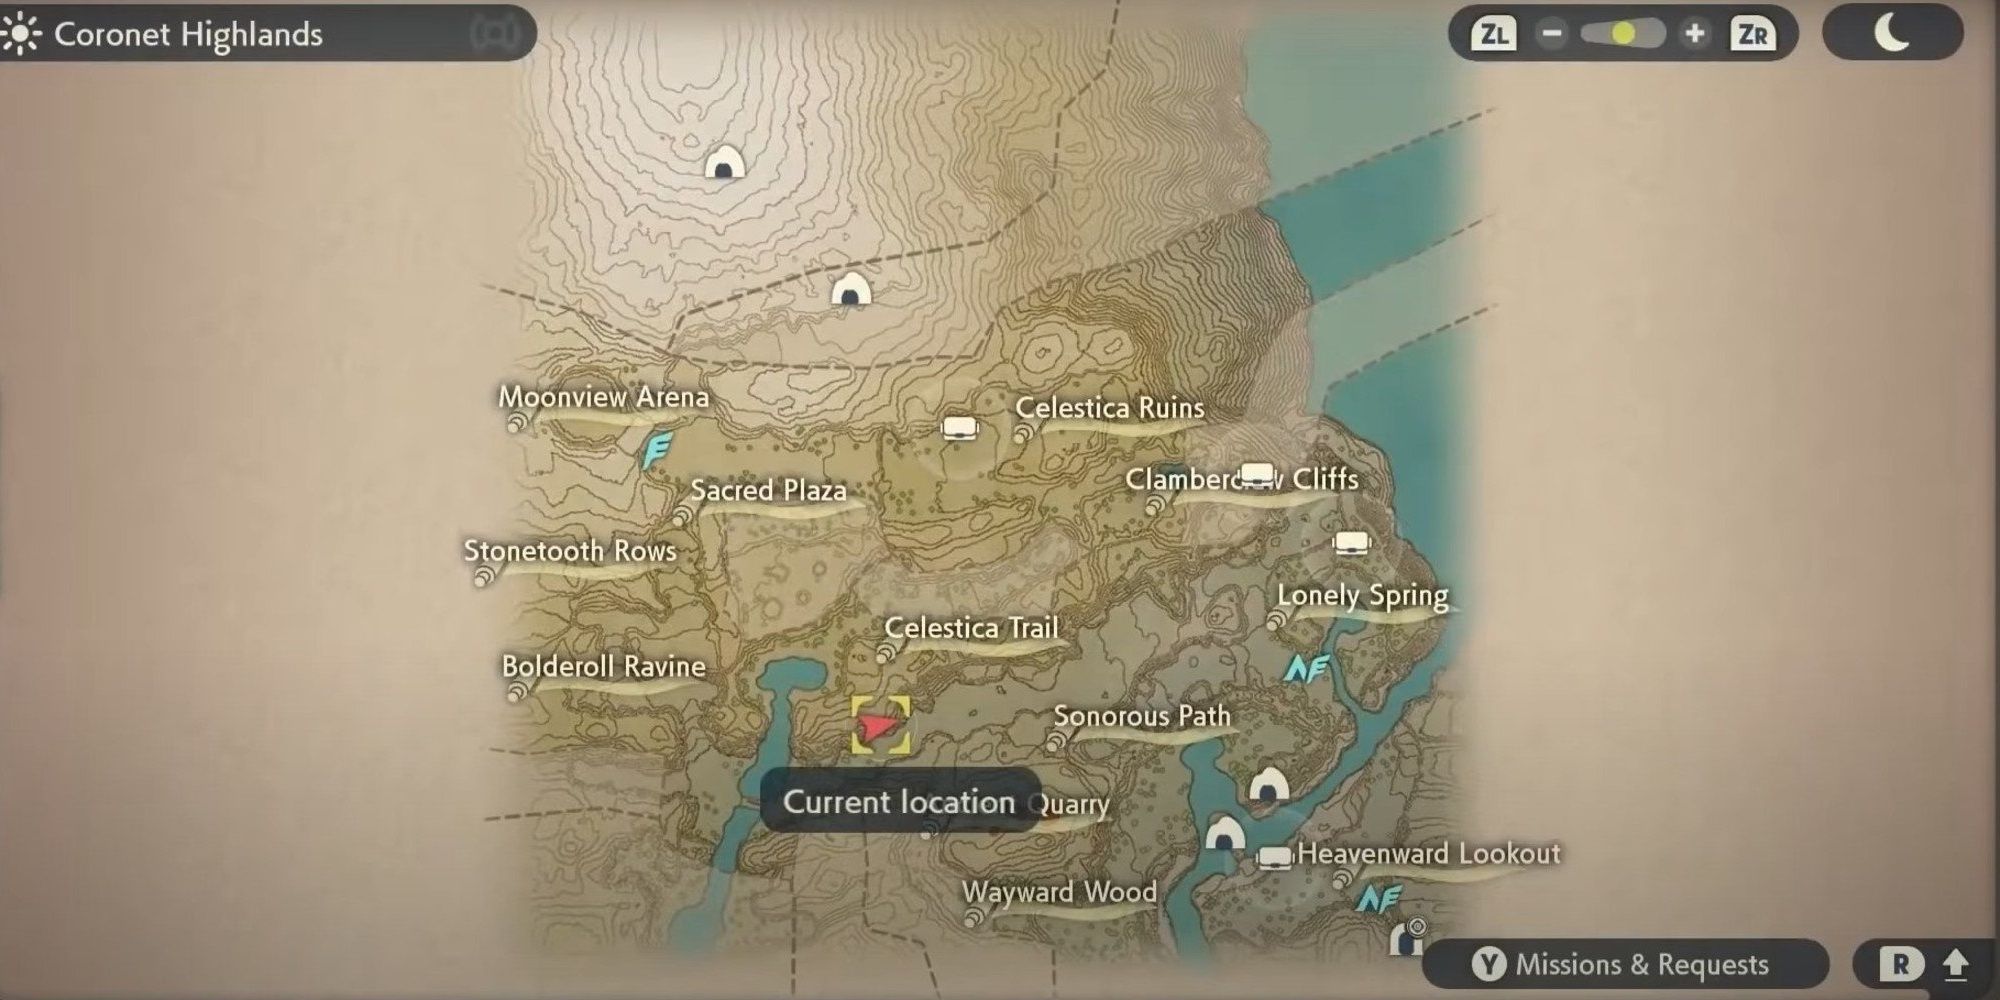 Coronet Highlands map in the game Pokemon Legends Arceus showcasing the different areas in this region as well as the character's current location.